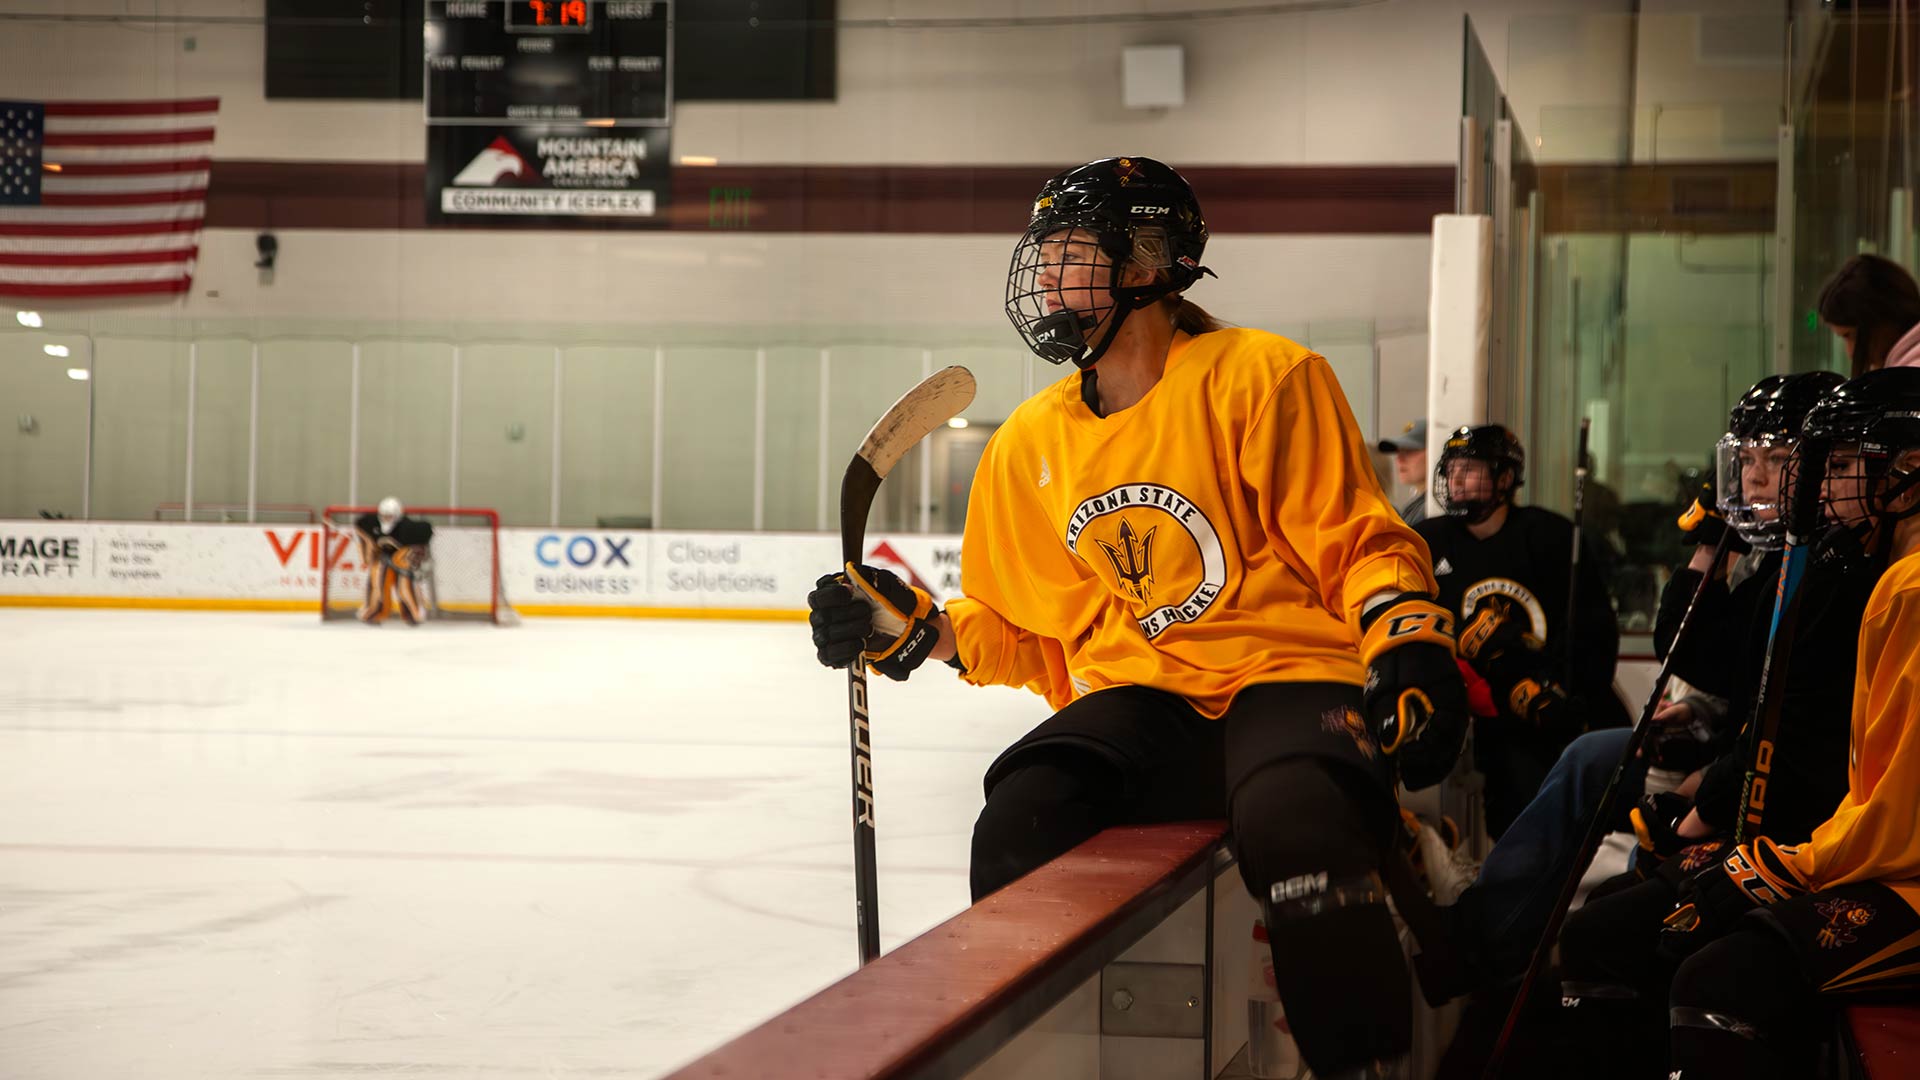 An Arizona State University hockey player is about to get on the ice at the Mountain America Community Iceplex on Wed., Feb. 21, 2024 in Tempe, AZ.